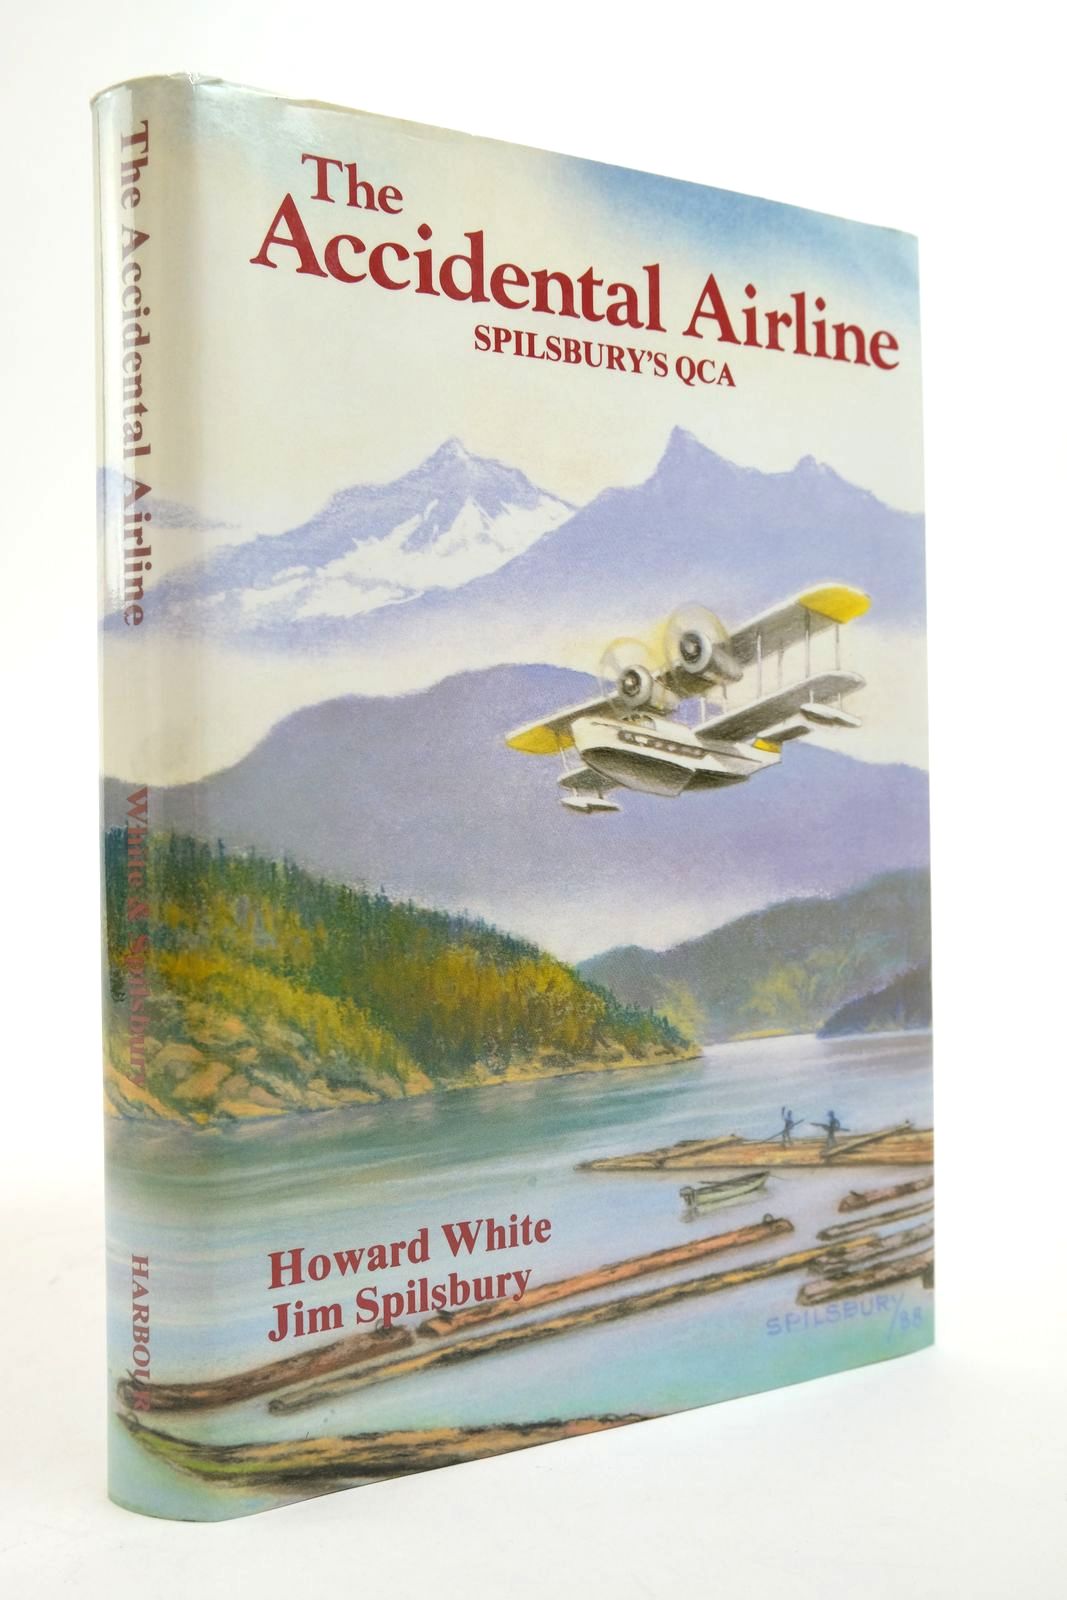 Photo of THE ACCIDENTAL AIRLINE: SPILSBURY'S QCA written by White, Howard Spilsbury, Jim published by Harbour Publishing (STOCK CODE: 2139105)  for sale by Stella & Rose's Books